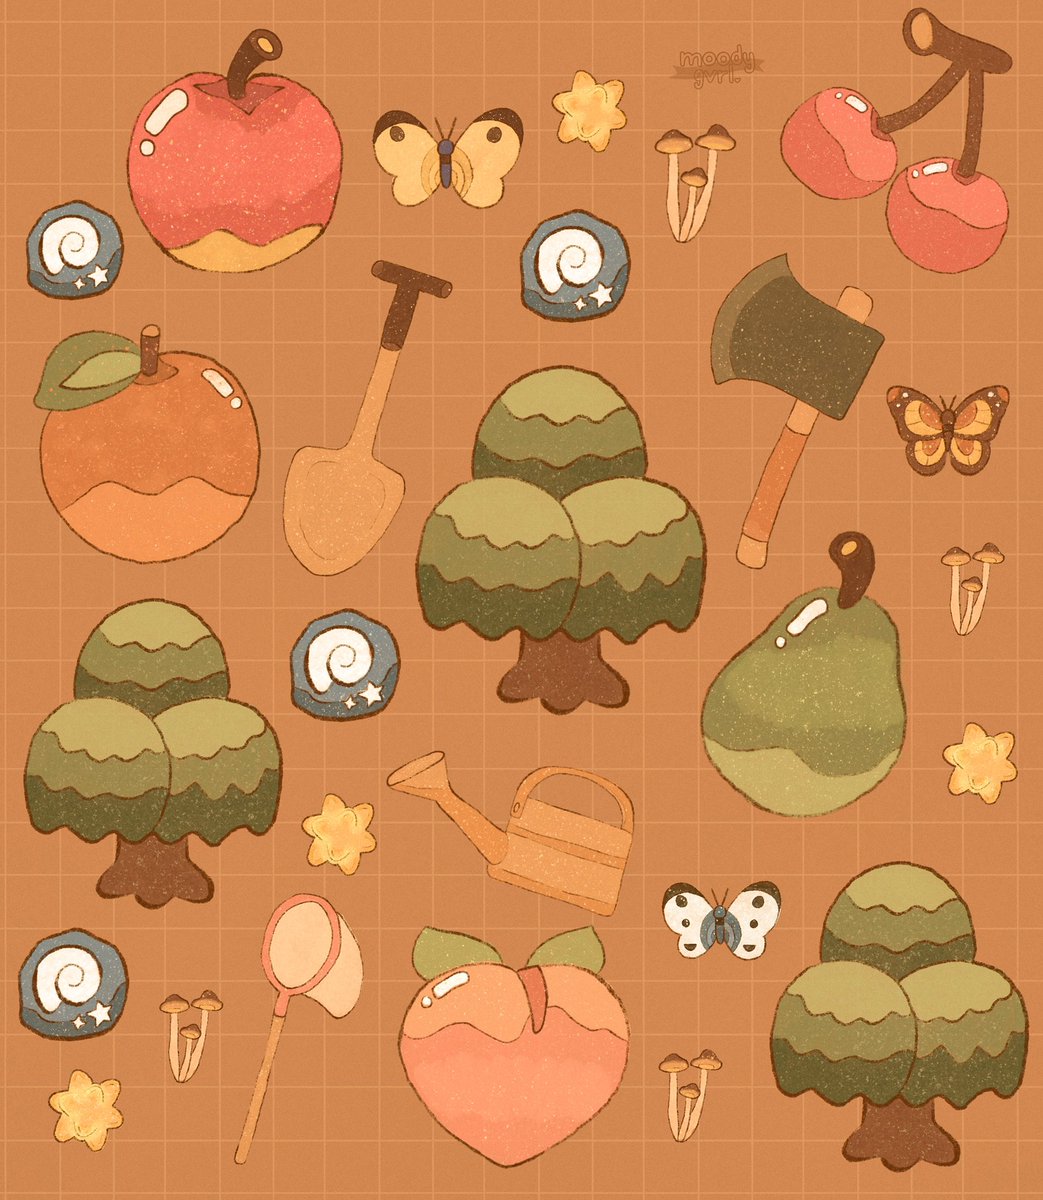 ☆*:.｡. animal crossing sticker pack! ｡.:*☆
i hope to be able to make it real someday... ♡
—— 🧸🌱#animalcrossing #NoCropArt #digitalart